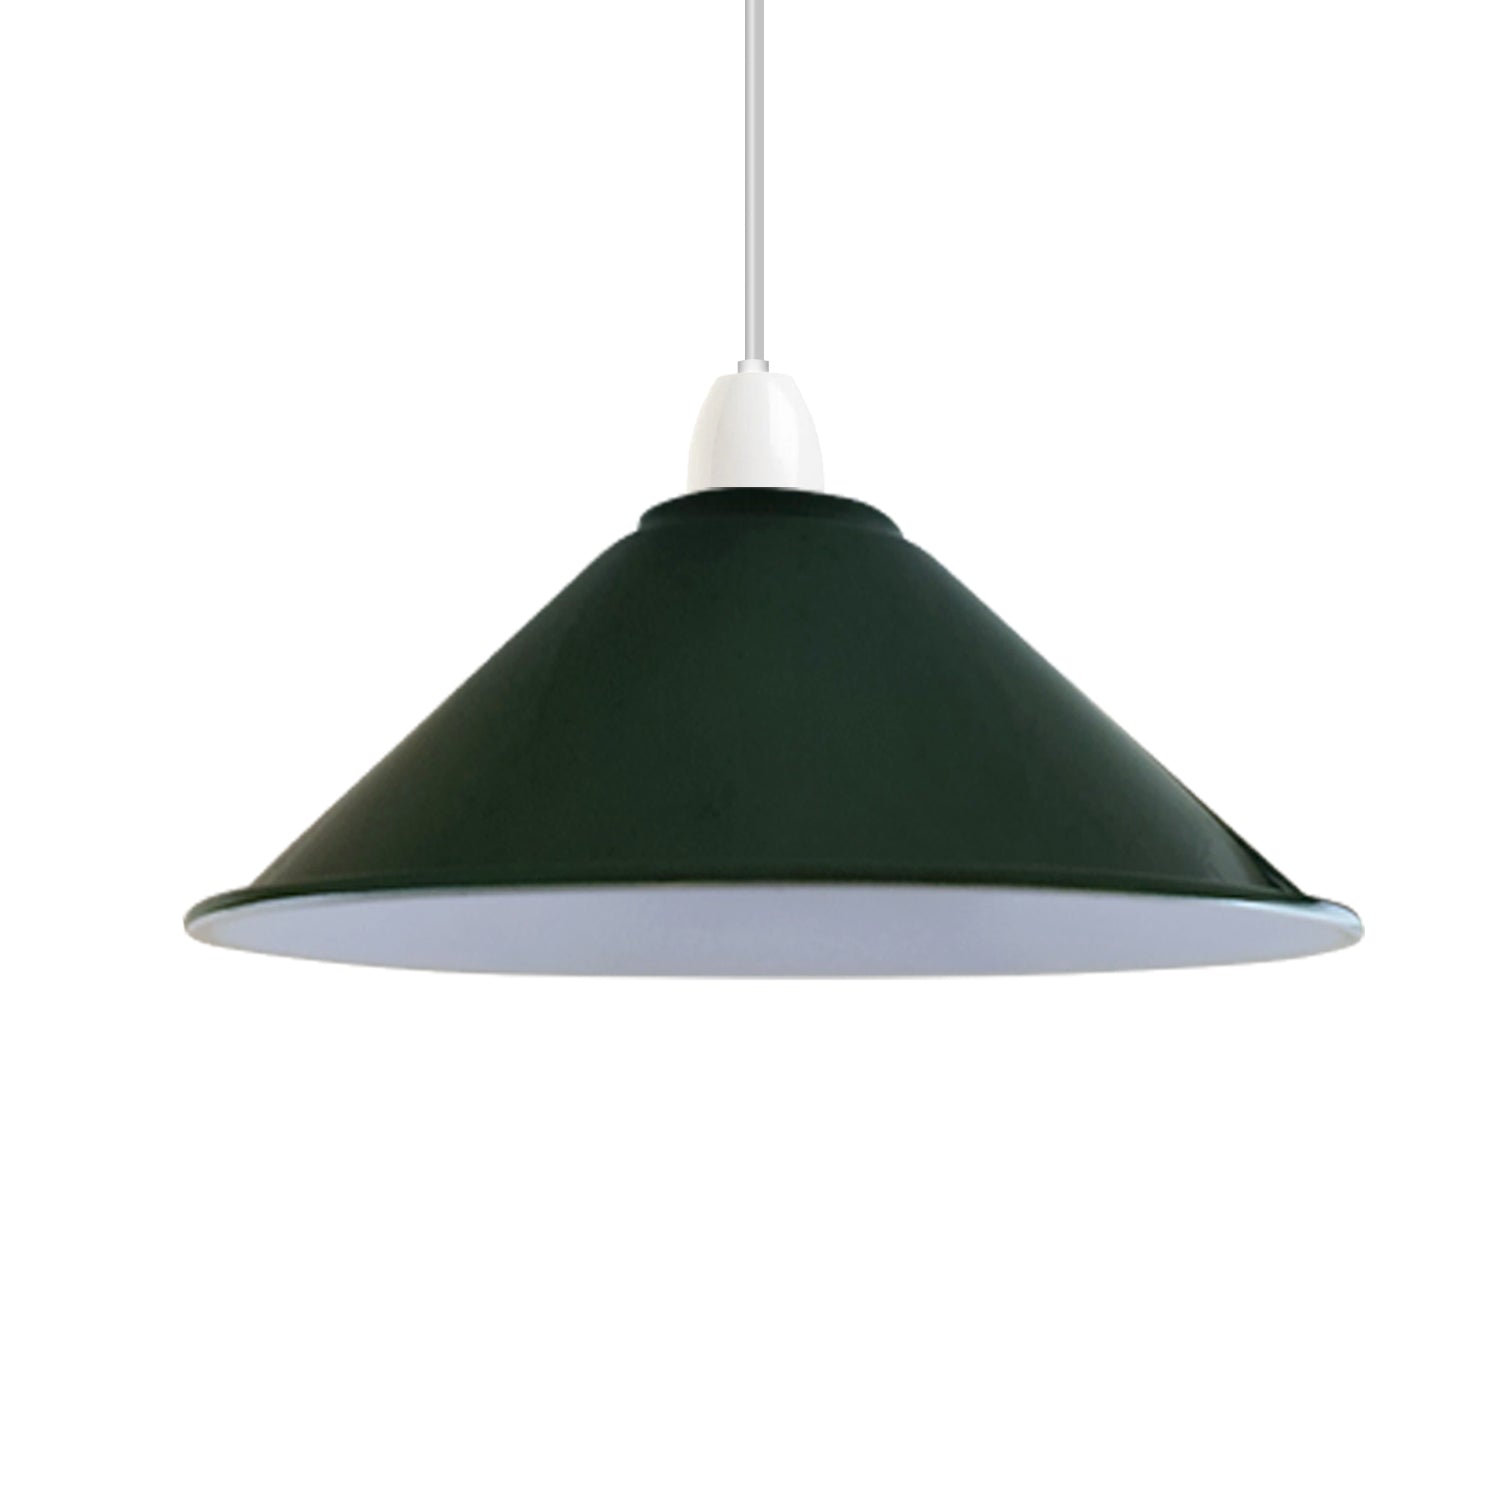 Shop for Green Lamp Shades And Light Shades Homeware Lighting 